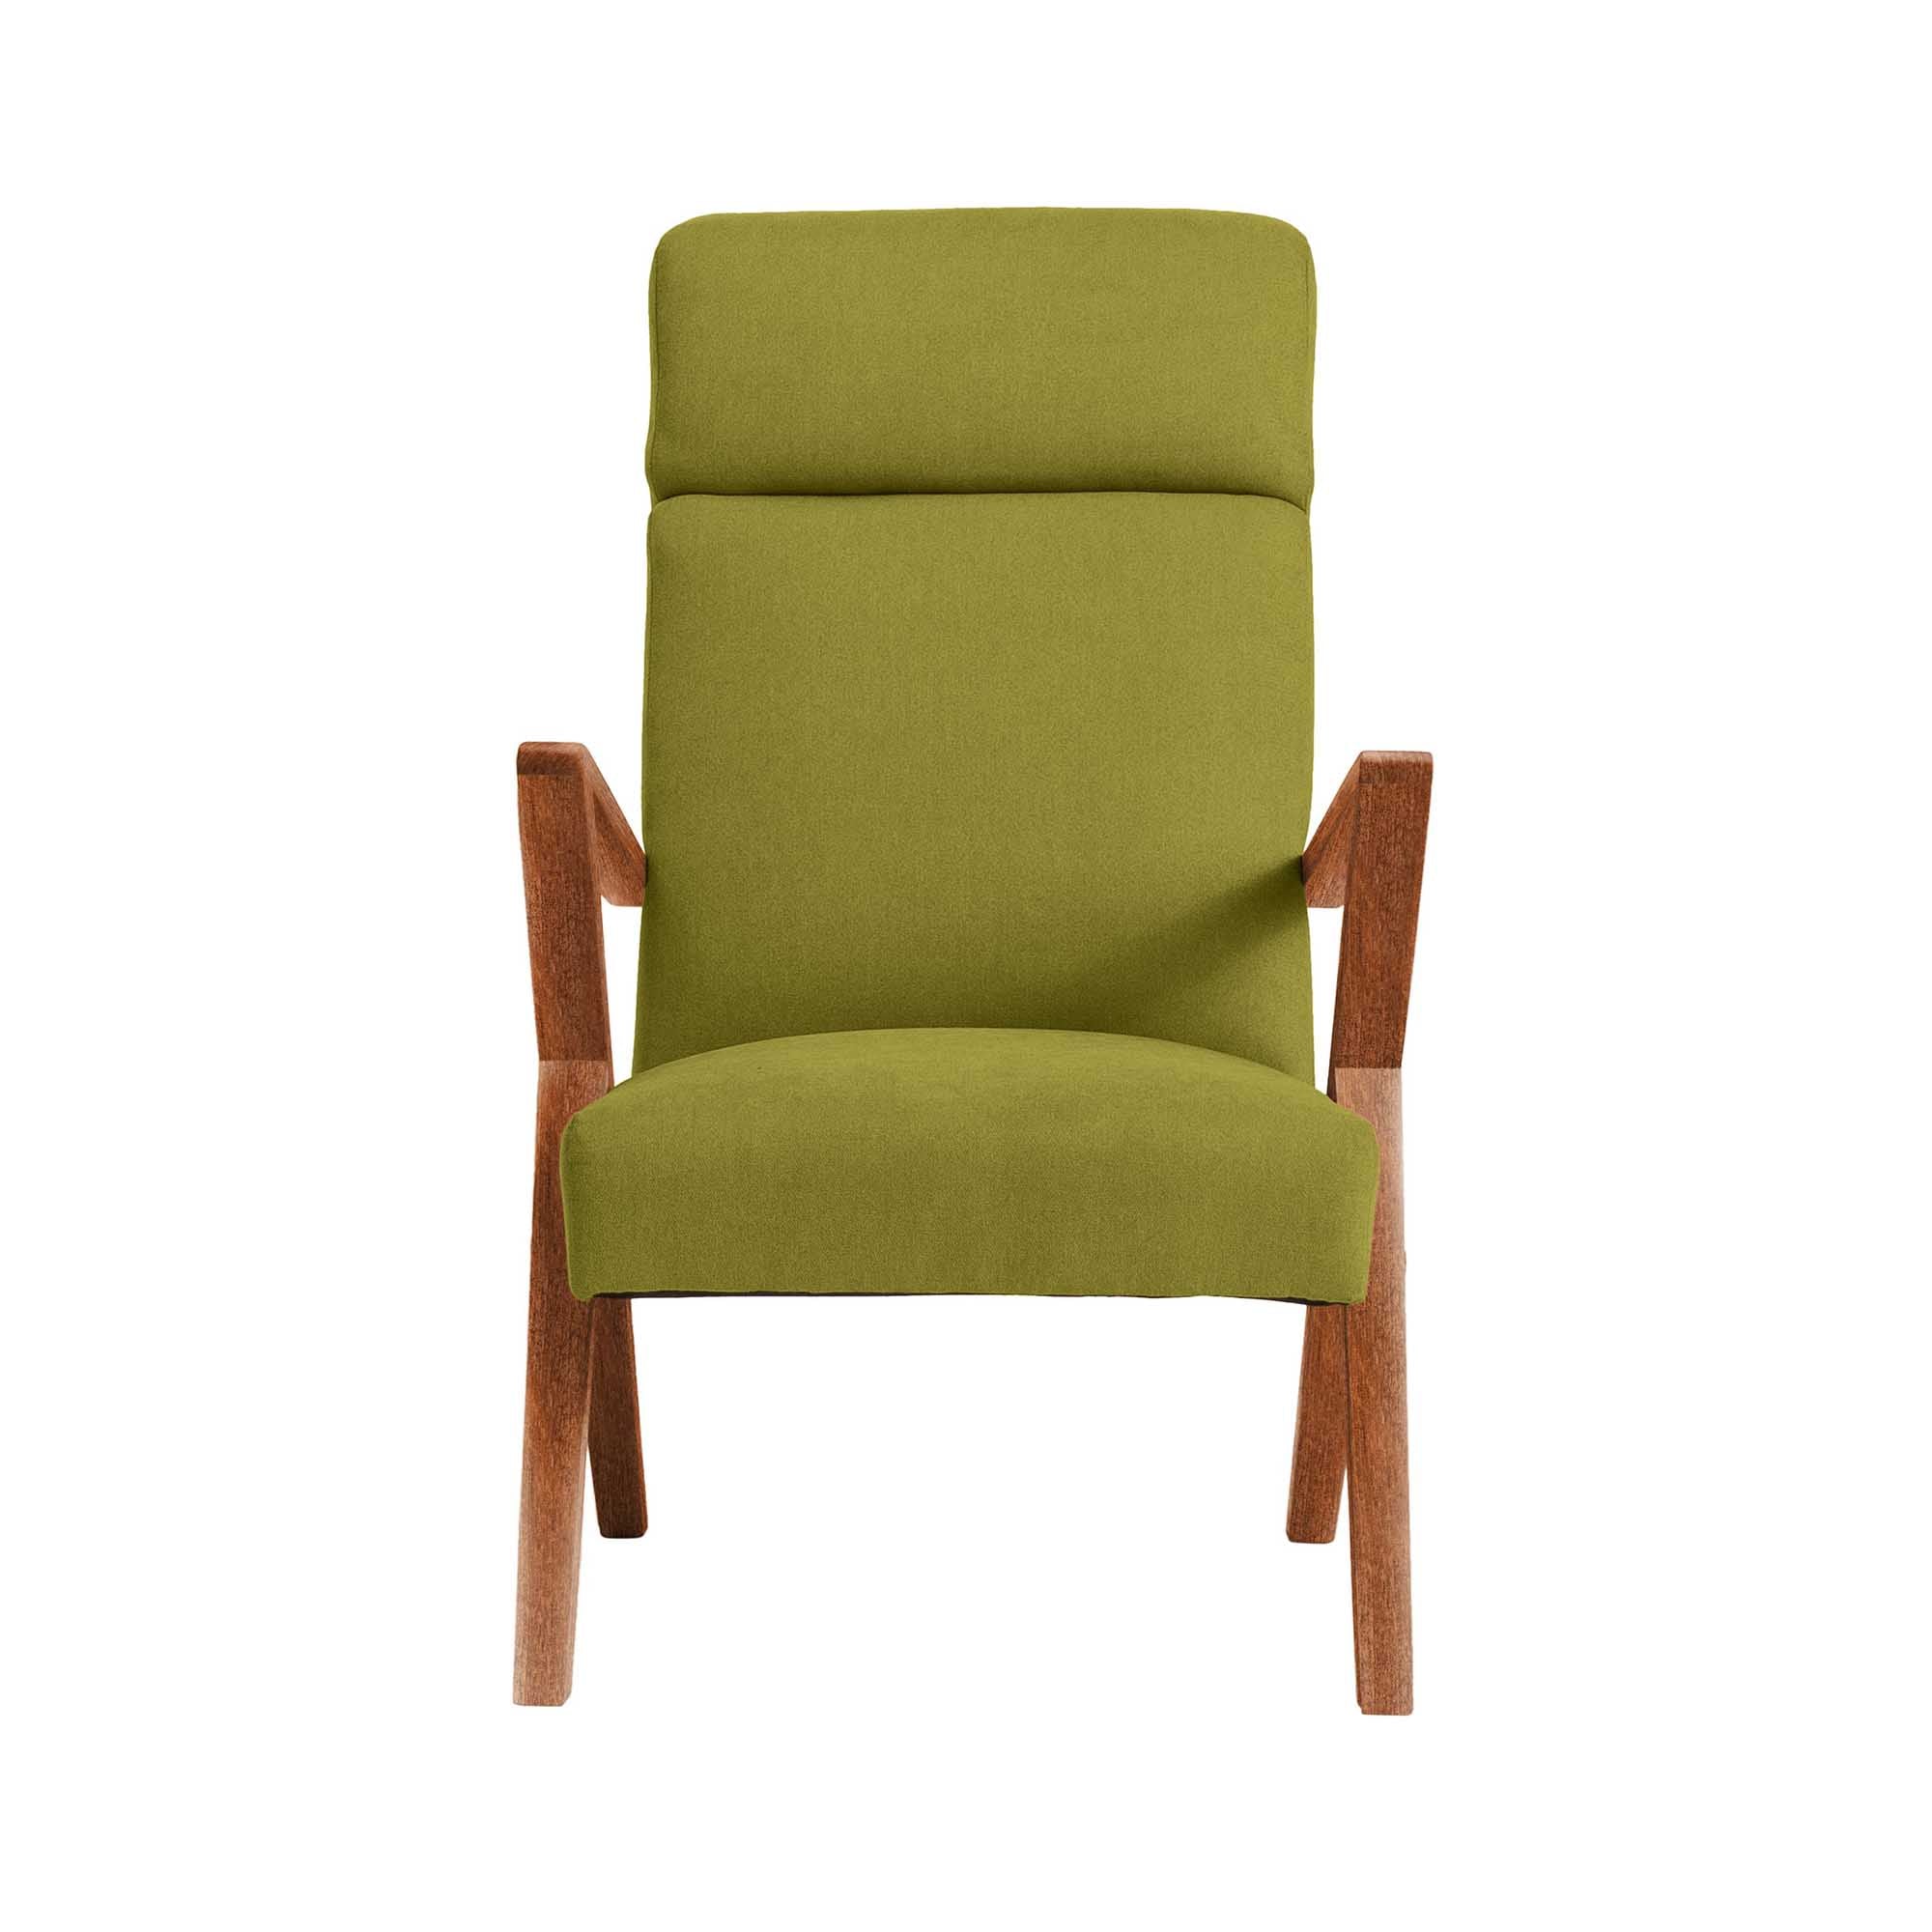 Lounge Chair, Beech Wood Frame, Walnut Colour green fabric, front view